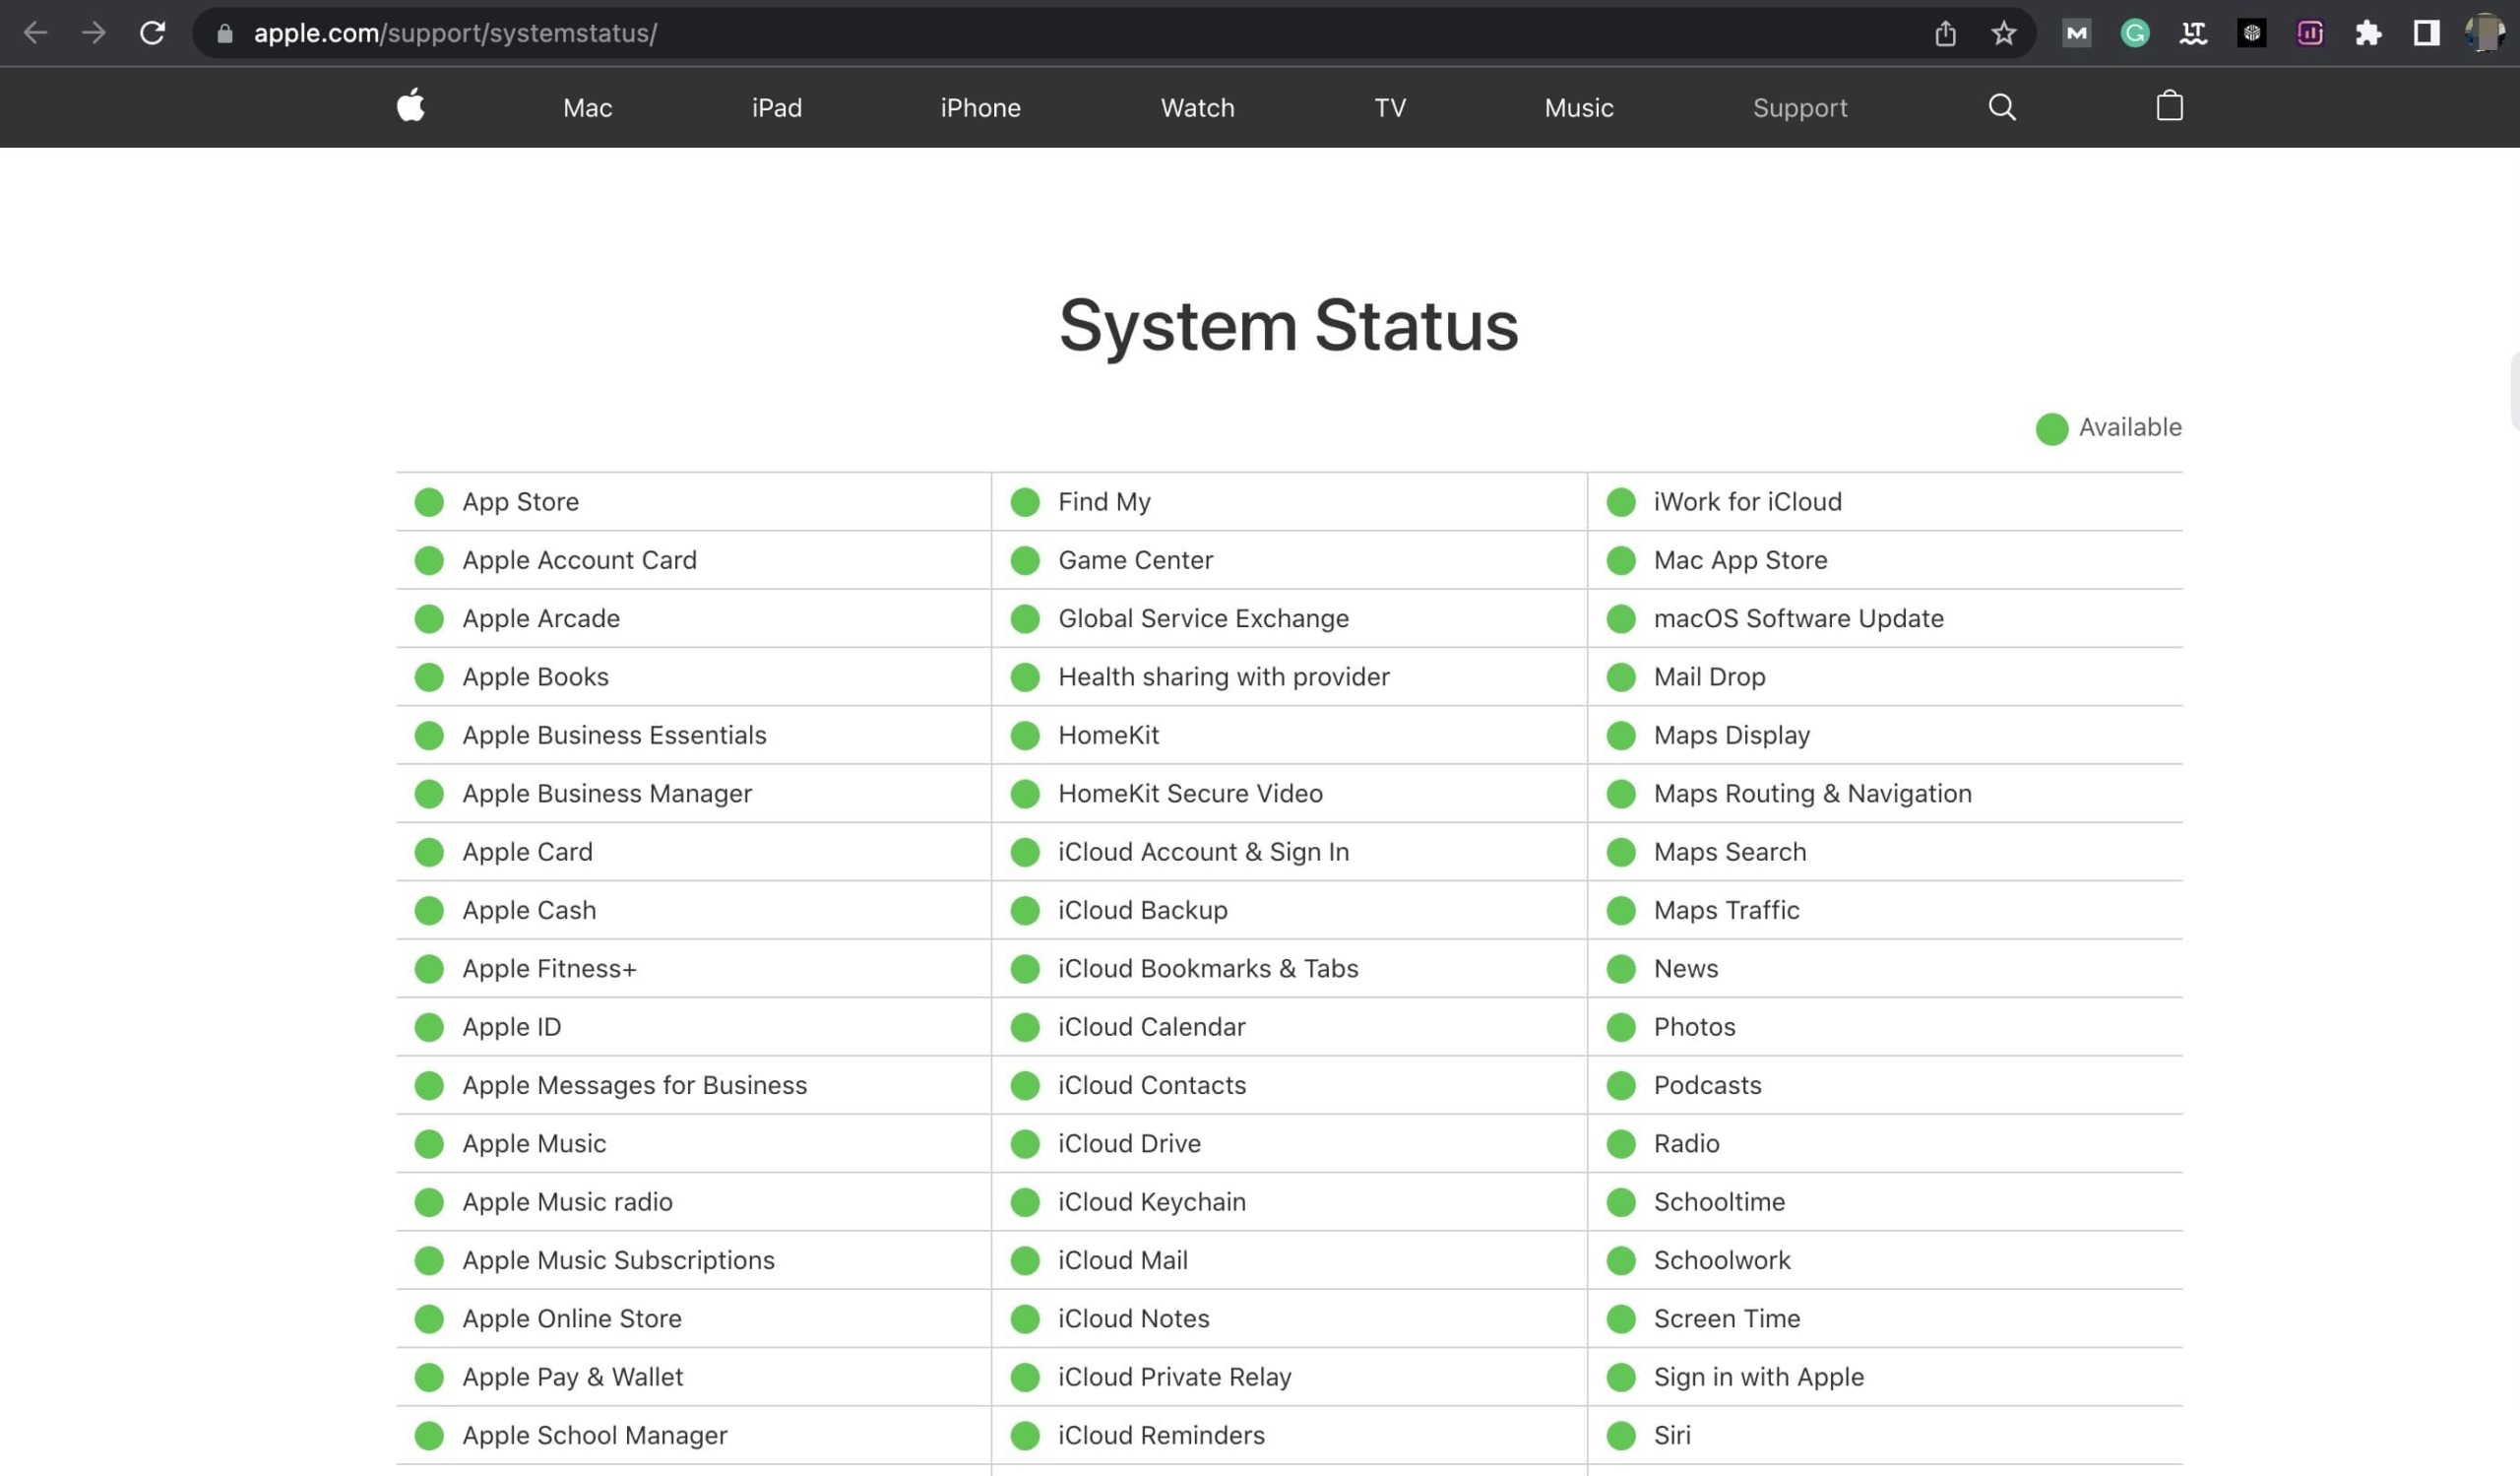 How to check Apple's system status